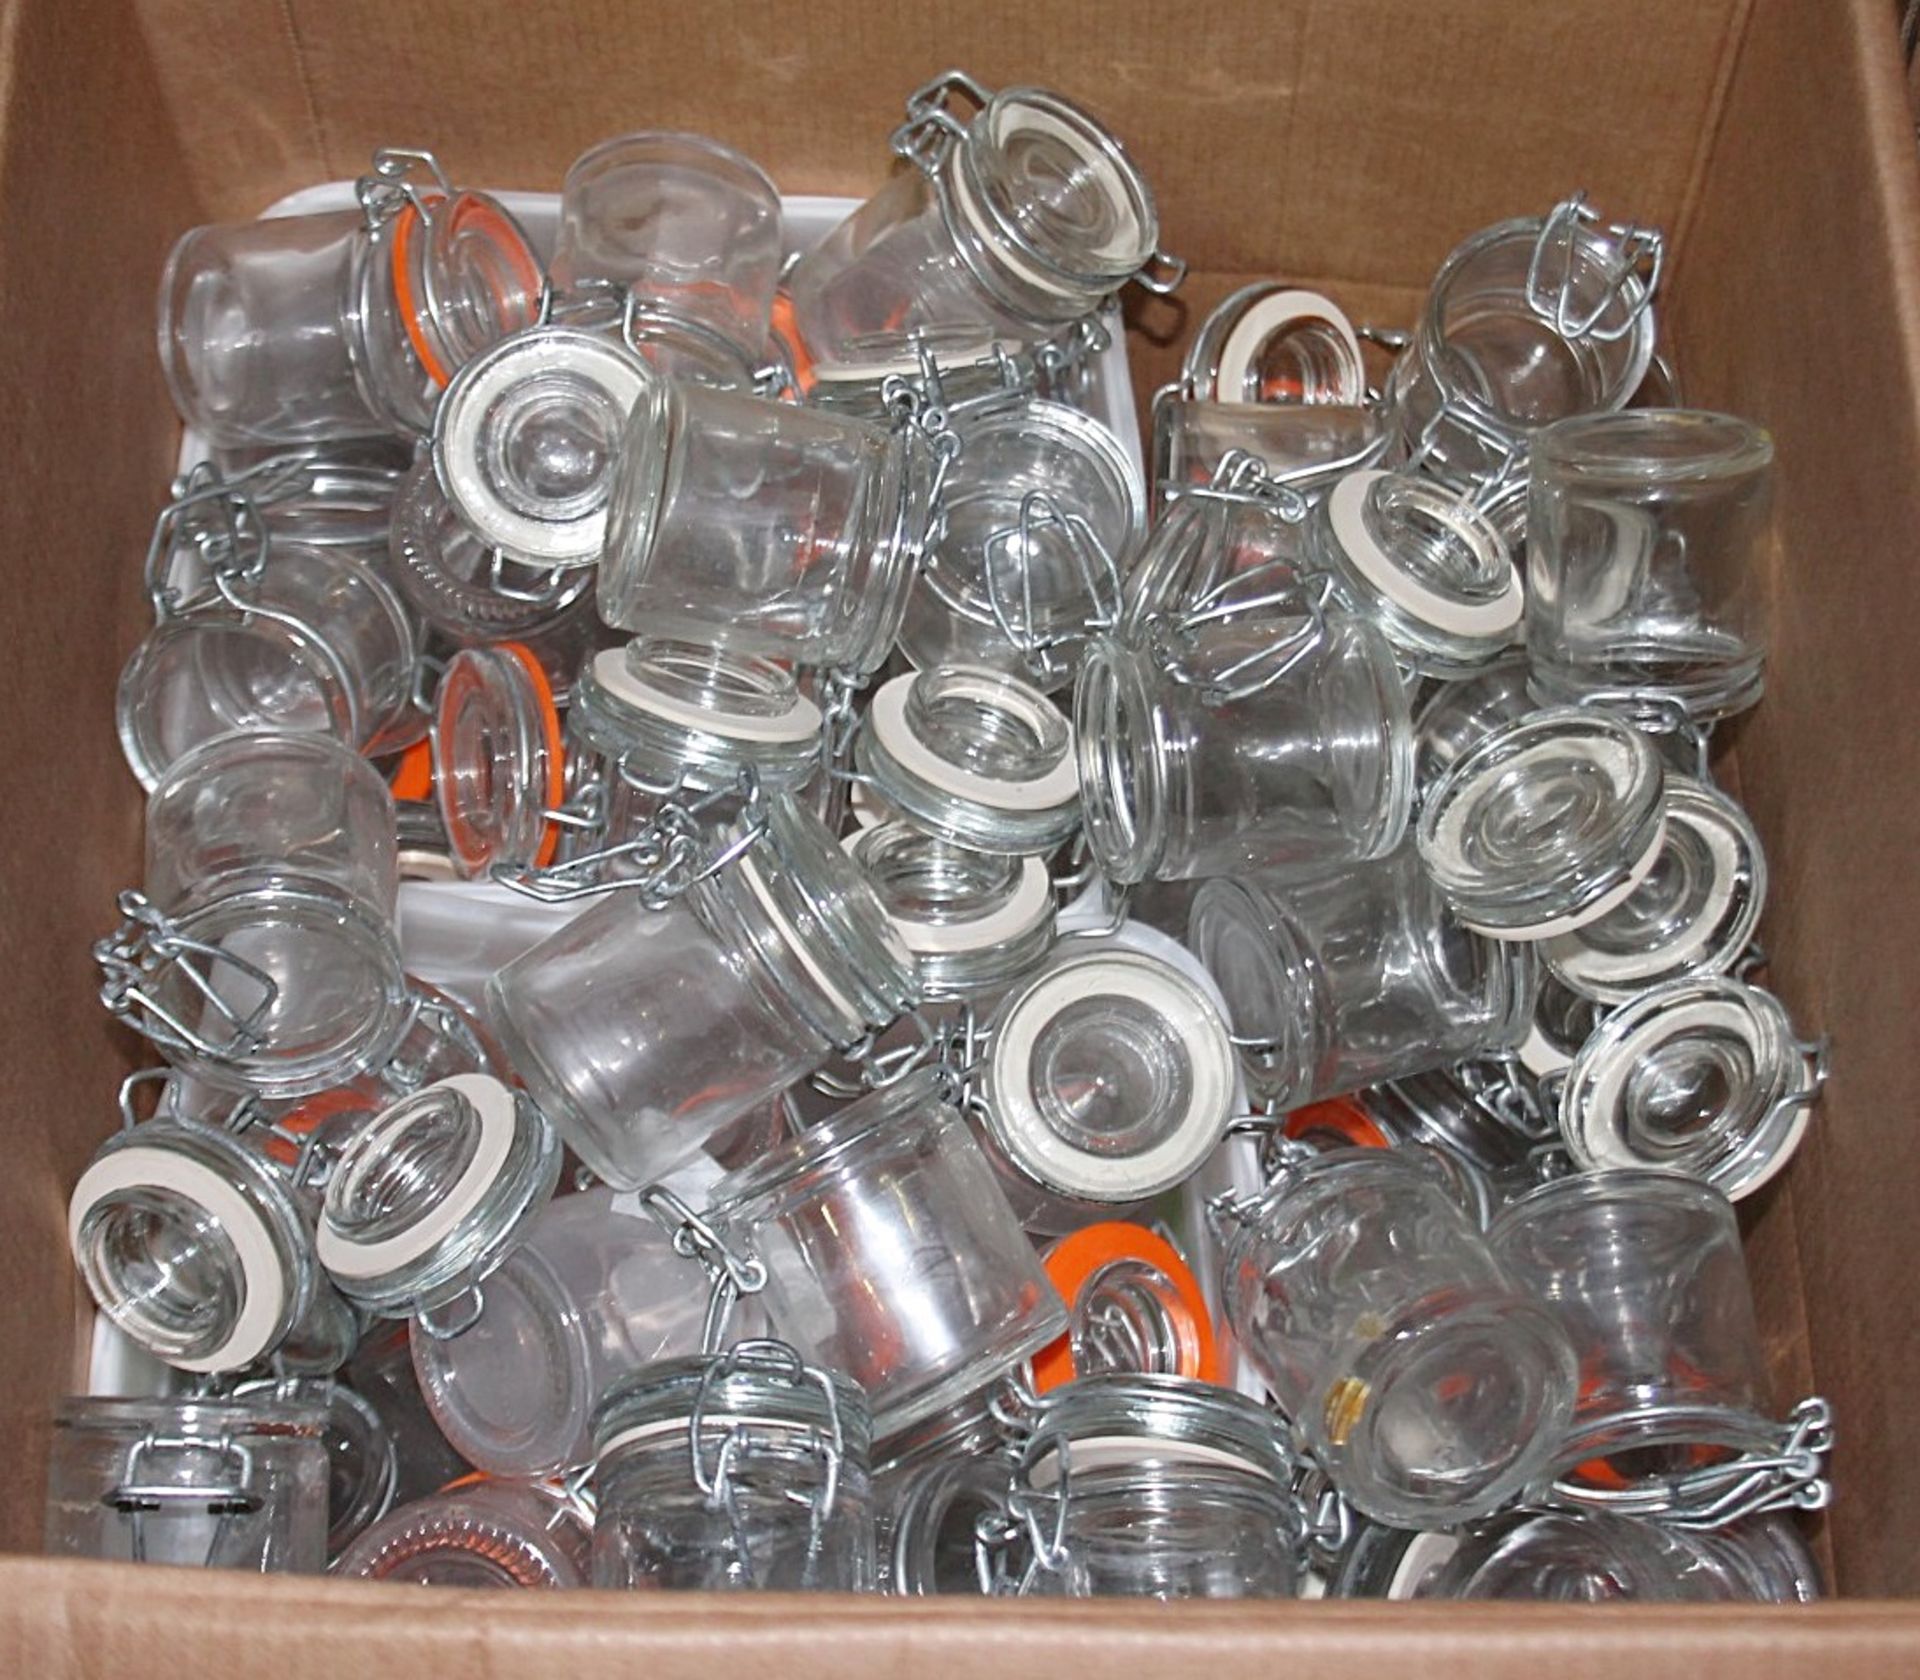 120 x Small Glass Condiment / Perserving Jars - Recently Removed From A Well-known Restaurant In - Image 3 of 6